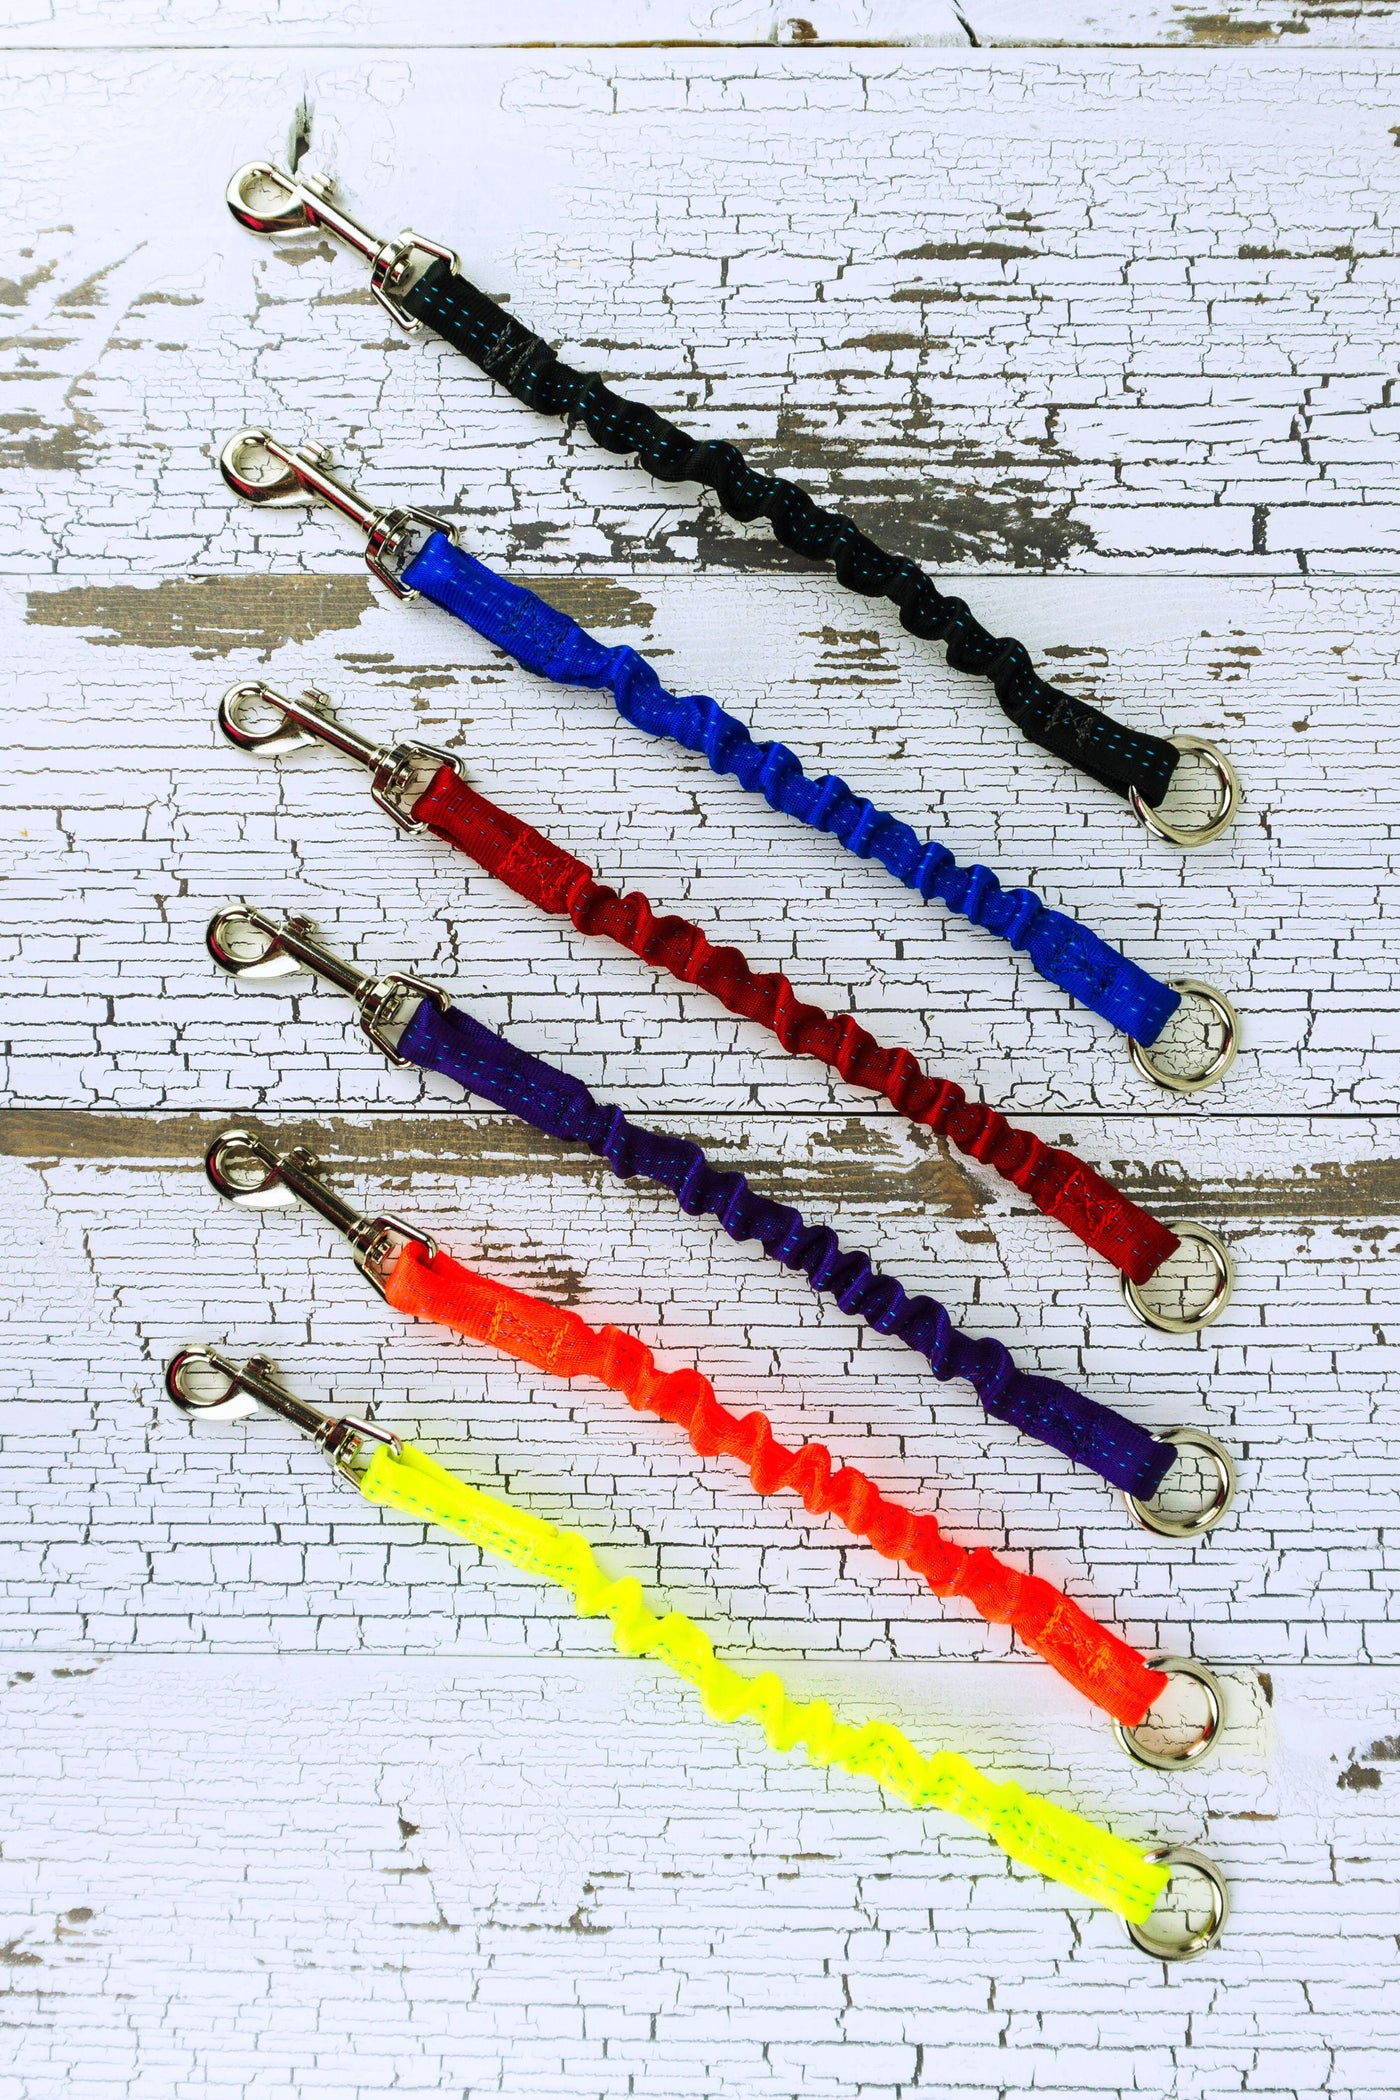 Bungee leashes are available in six colors, including black, blue, red, purple, neon orange, or neon yellow.